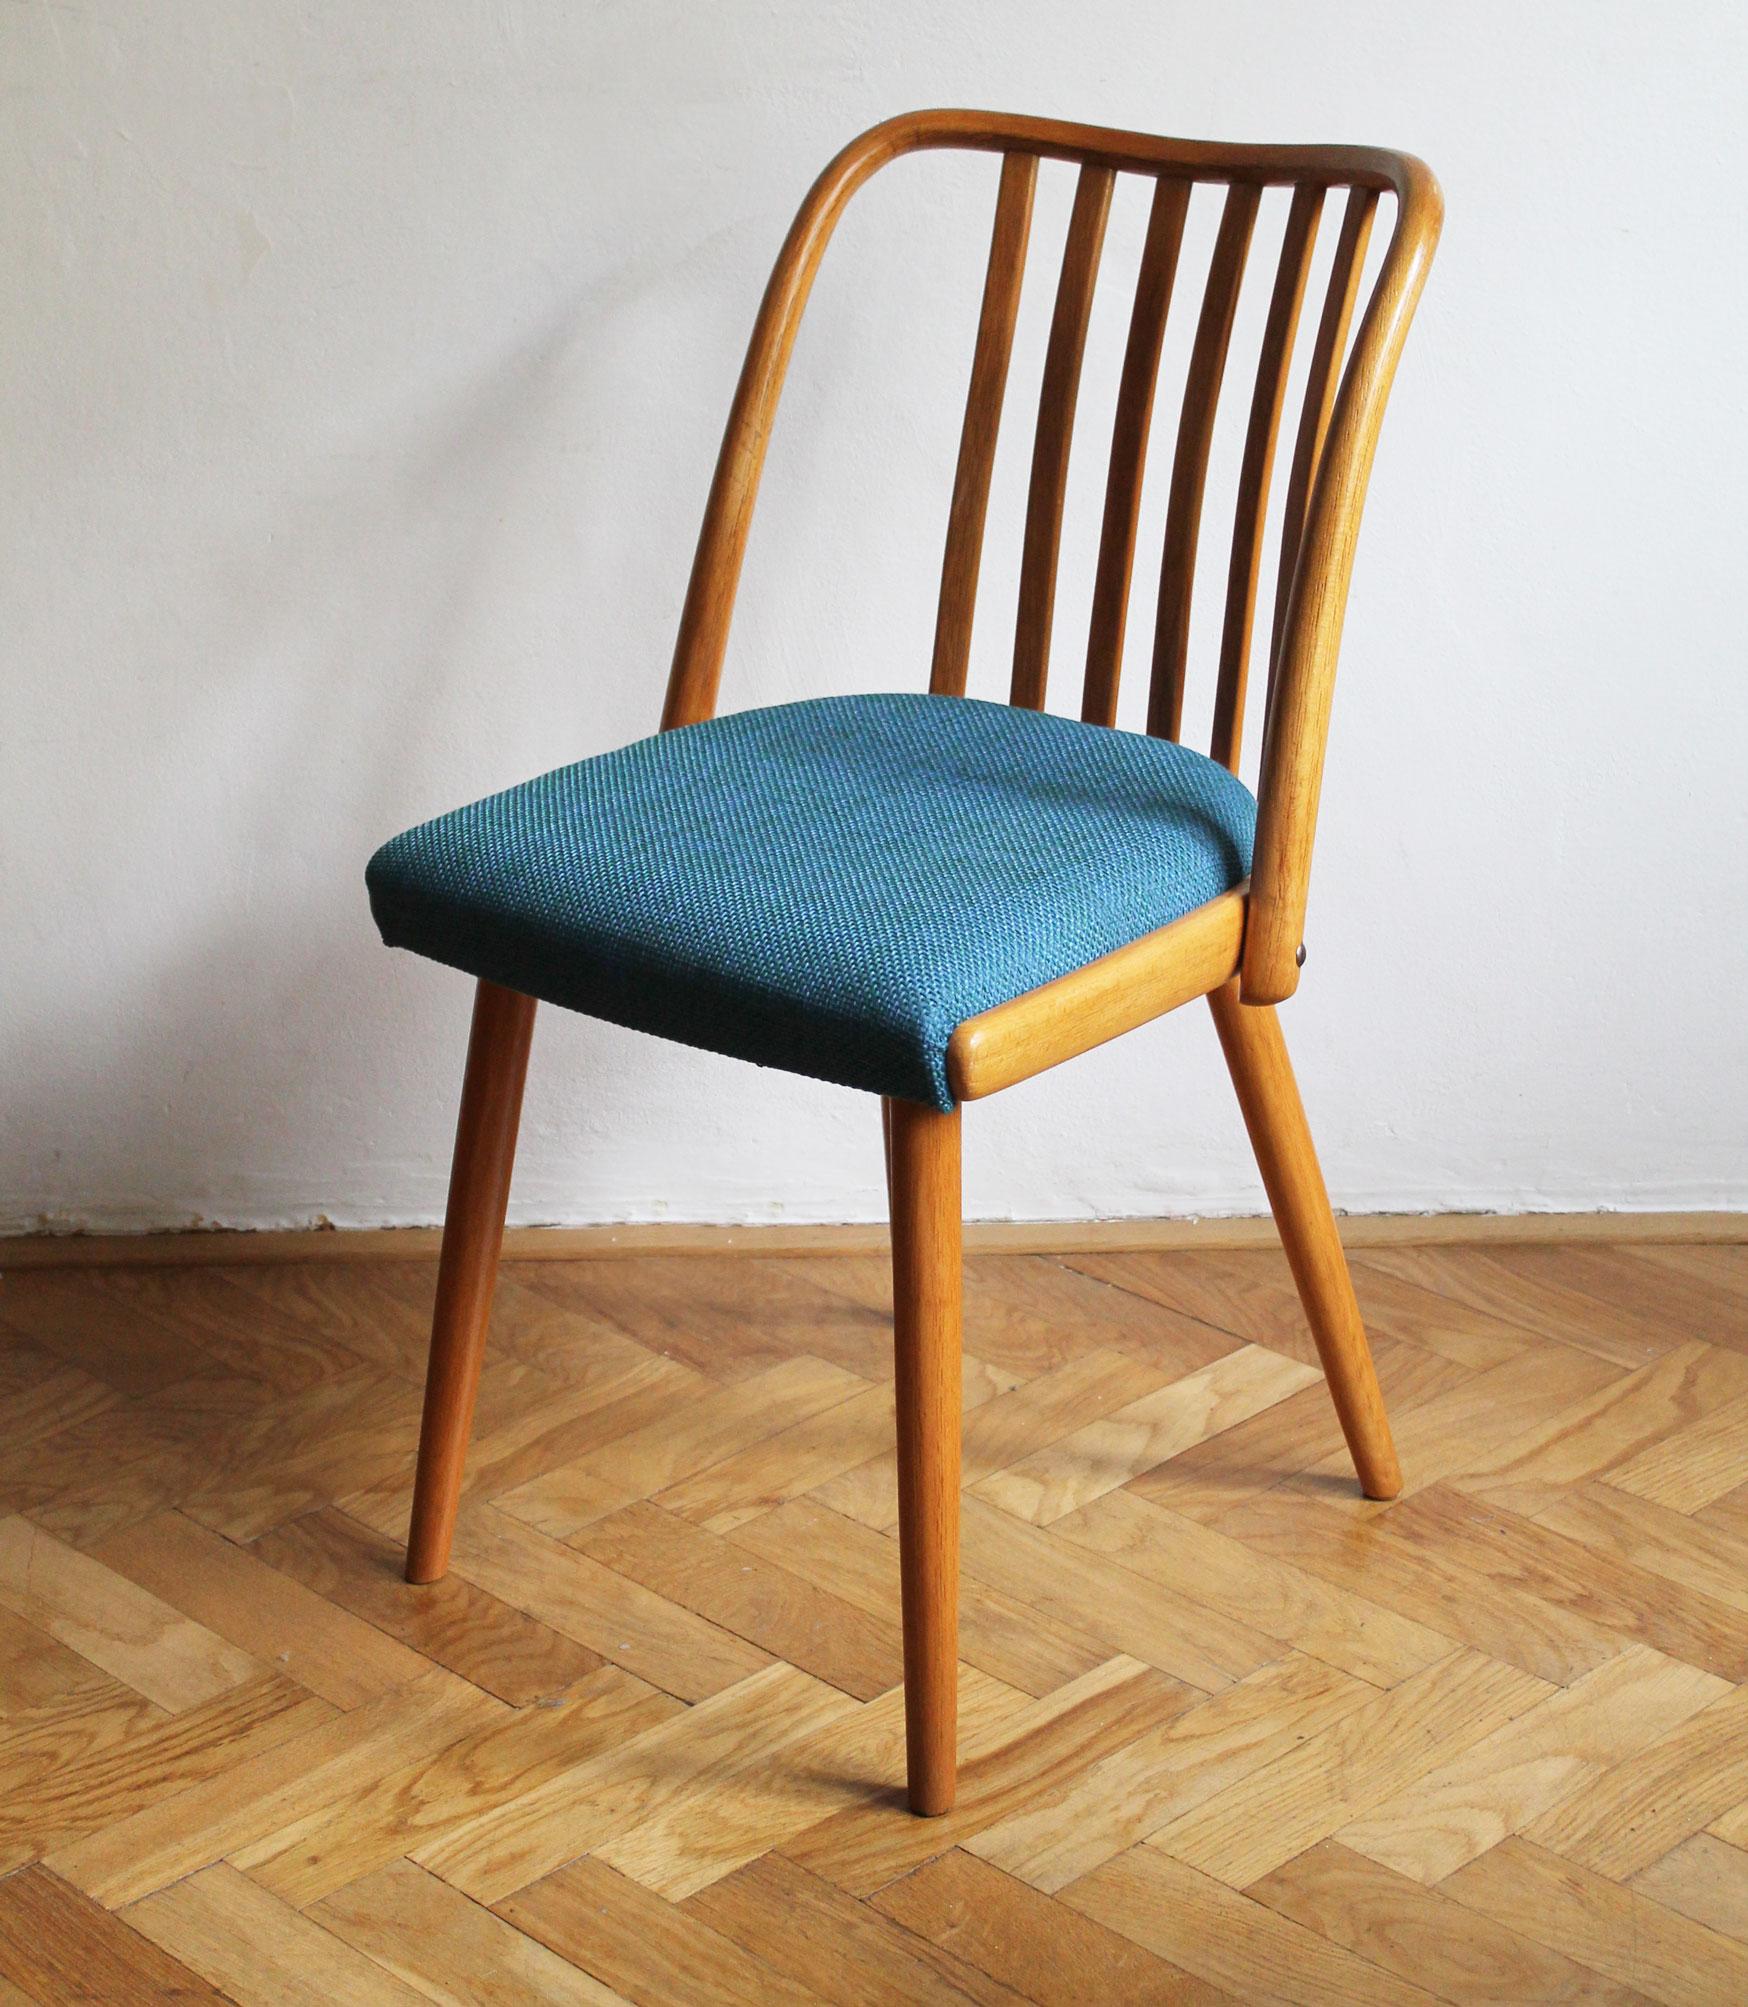 1960's Mid Century Dining Chair Model U - 300 by Antonin Suman In Good Condition For Sale In Brno, CZ